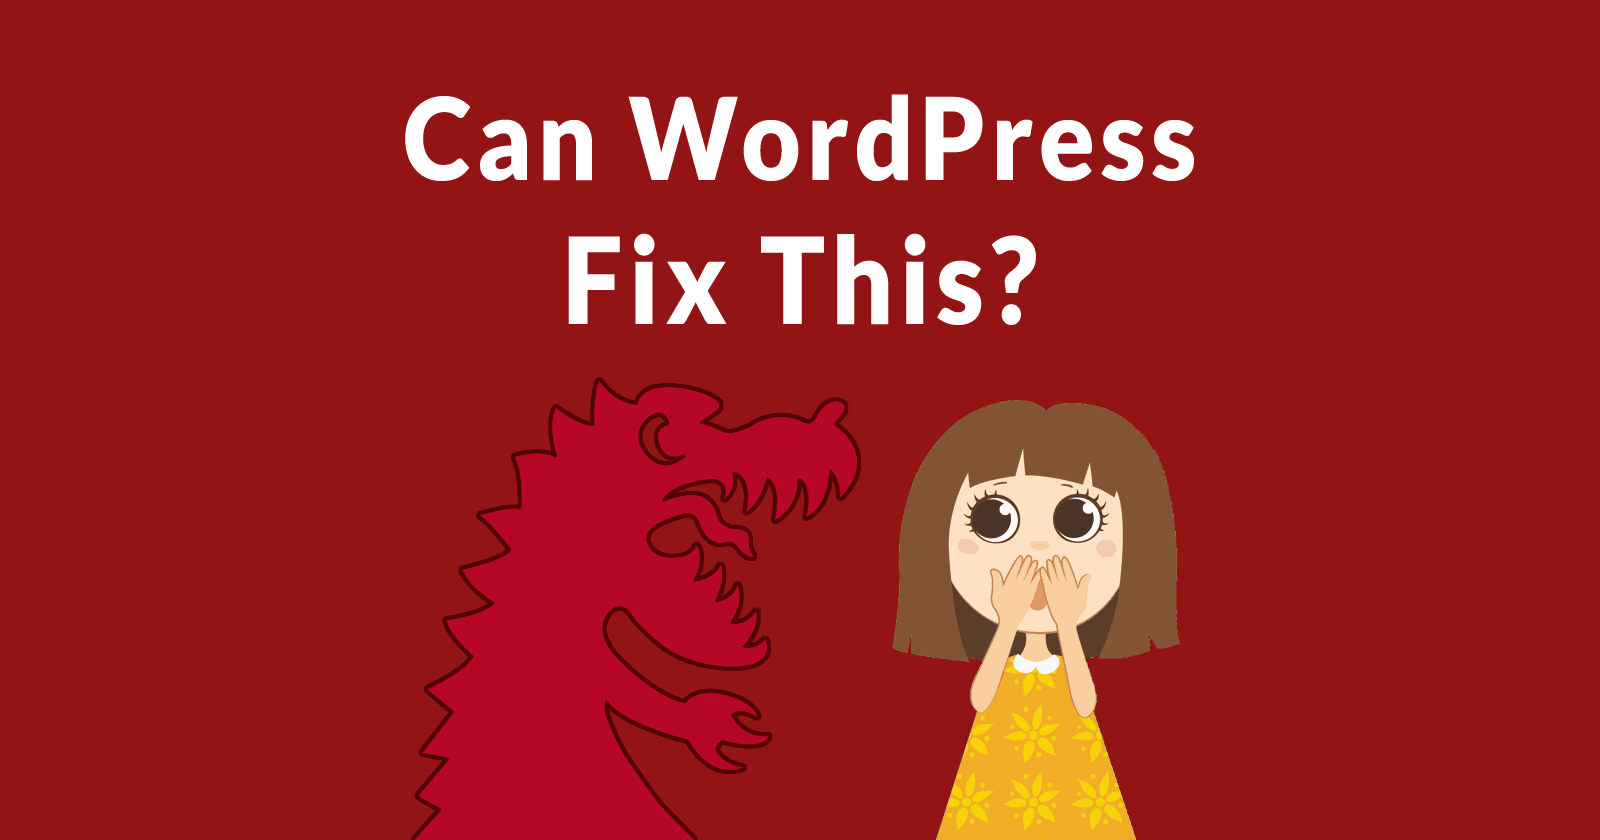 61% of WordPress publishers use older versions of PHP. Can WordPress F